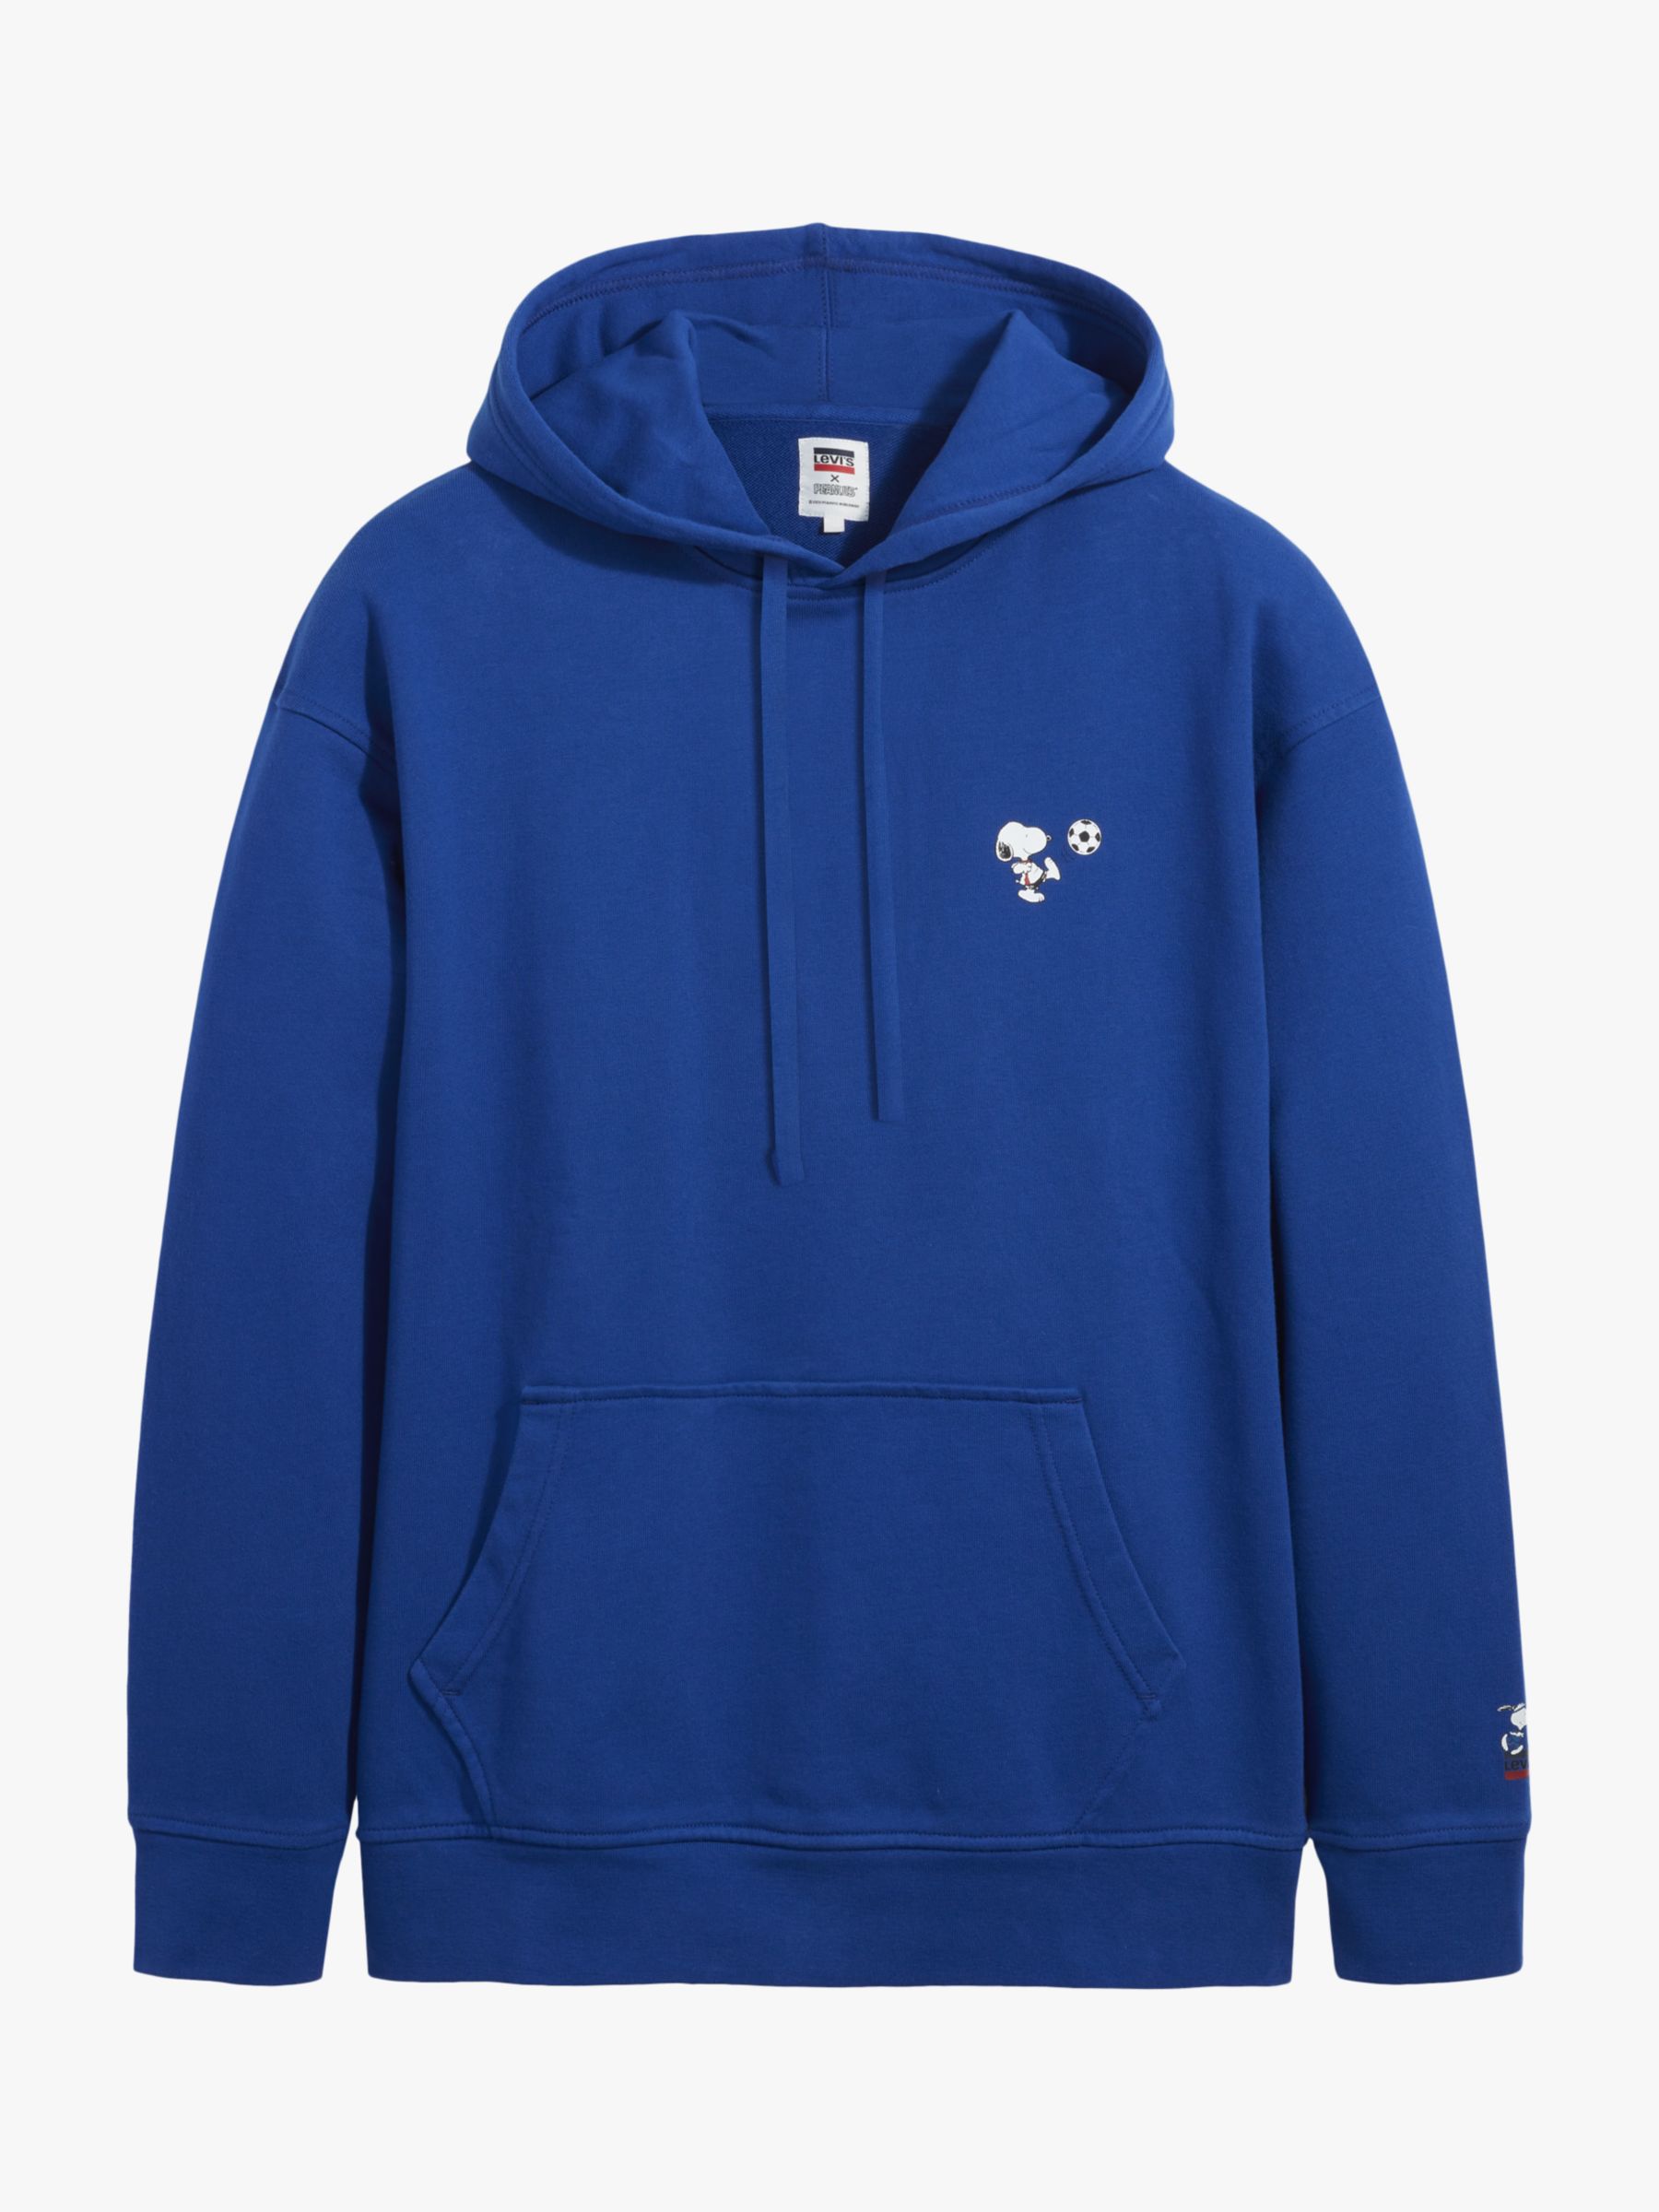 Levi's Peanuts Relaxed Snoopy Soccer Logo Hoodie, Blue/Multi